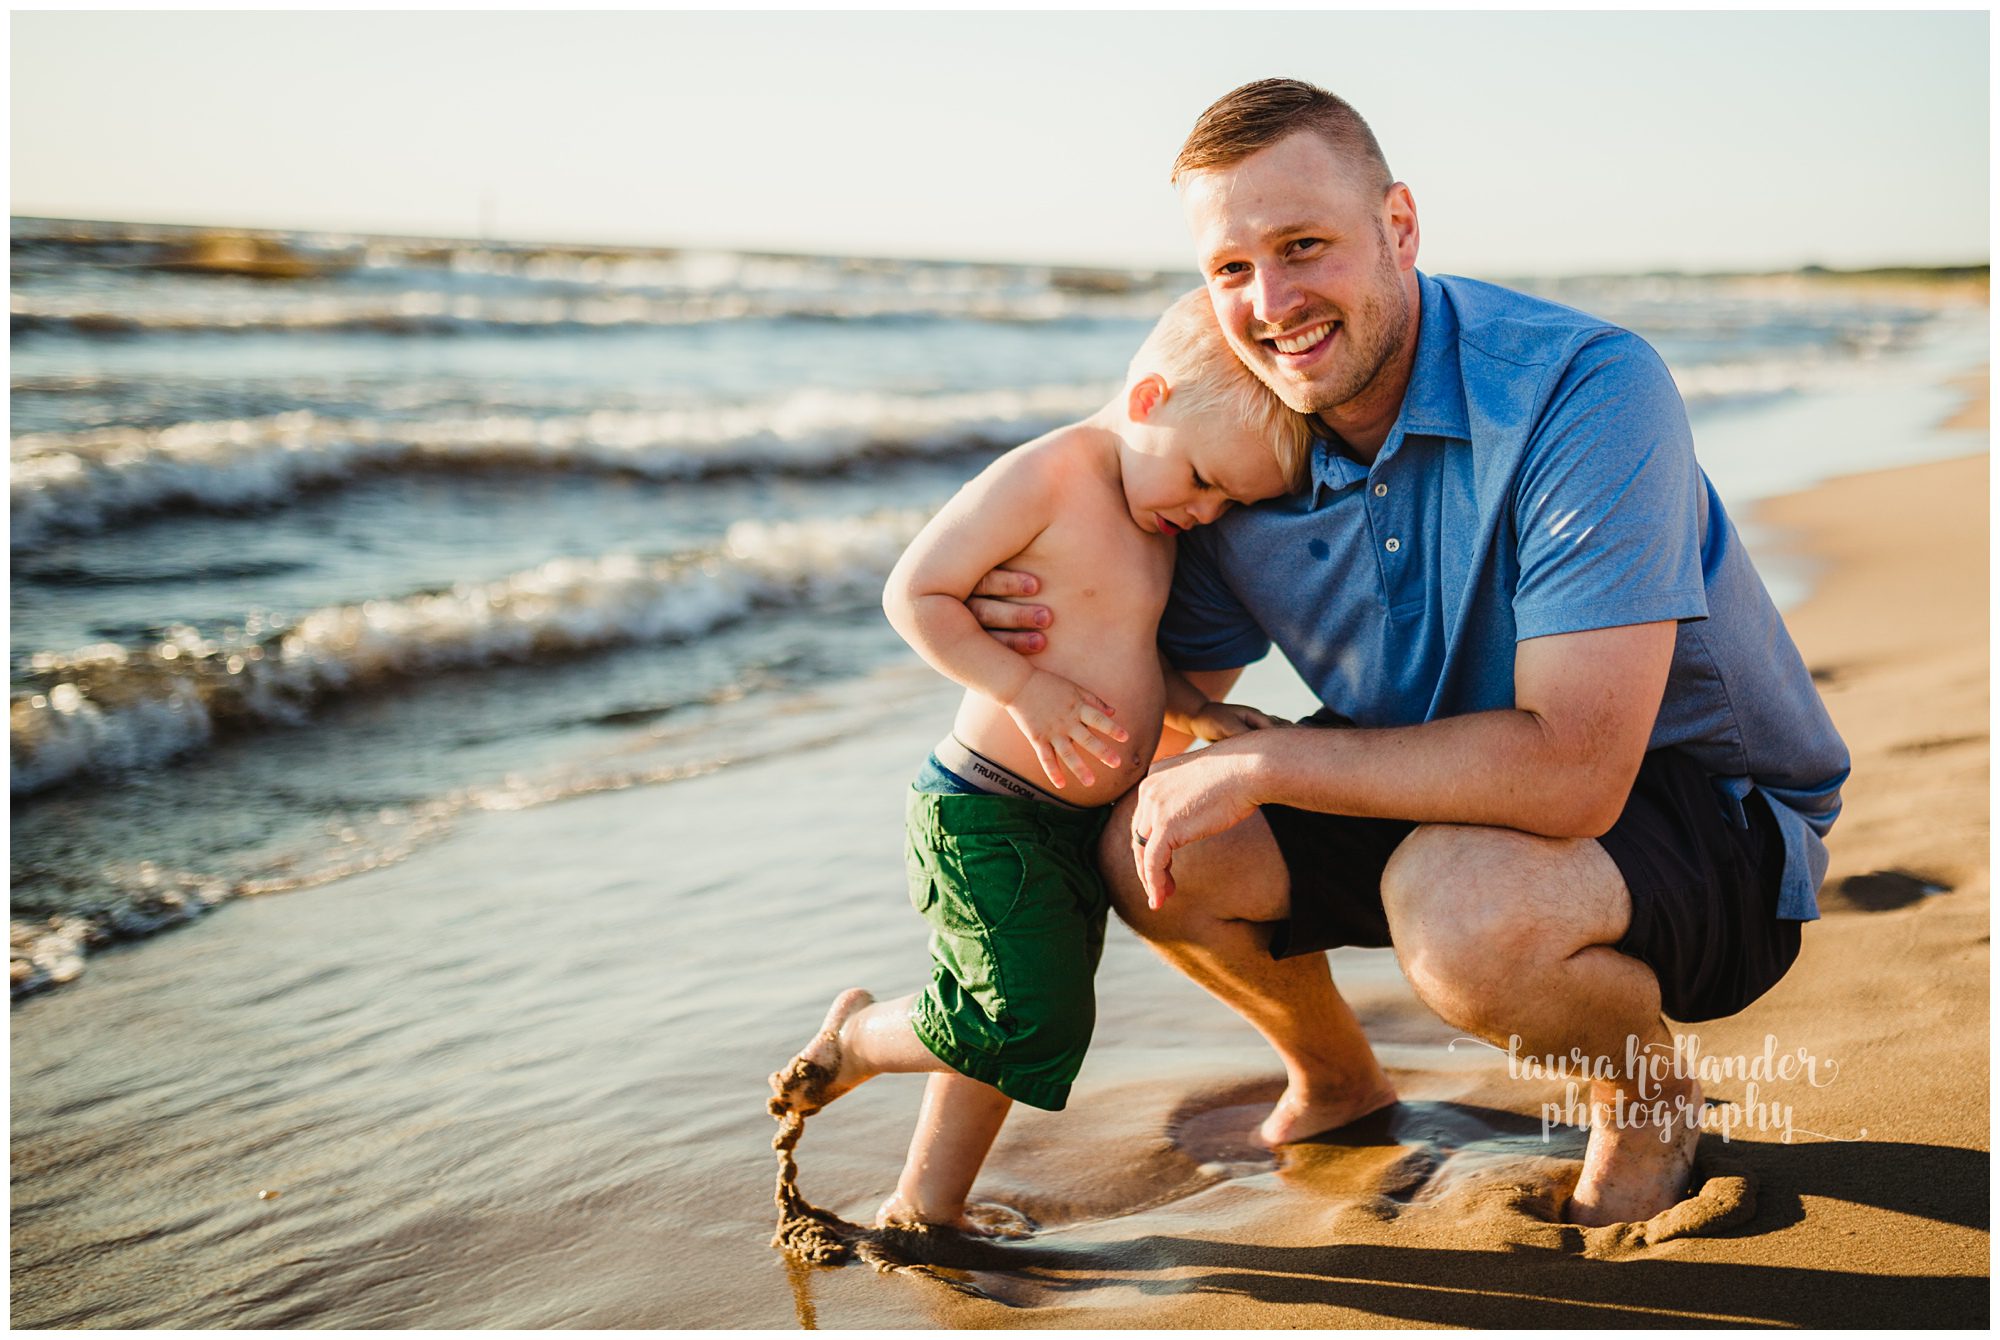 father son photos, father son snuggle on the beach, candid family beach portraits, what to wear beach portraits, Oval Beach Saugatuck, Laura Hollander Photography, west Michigan photographer